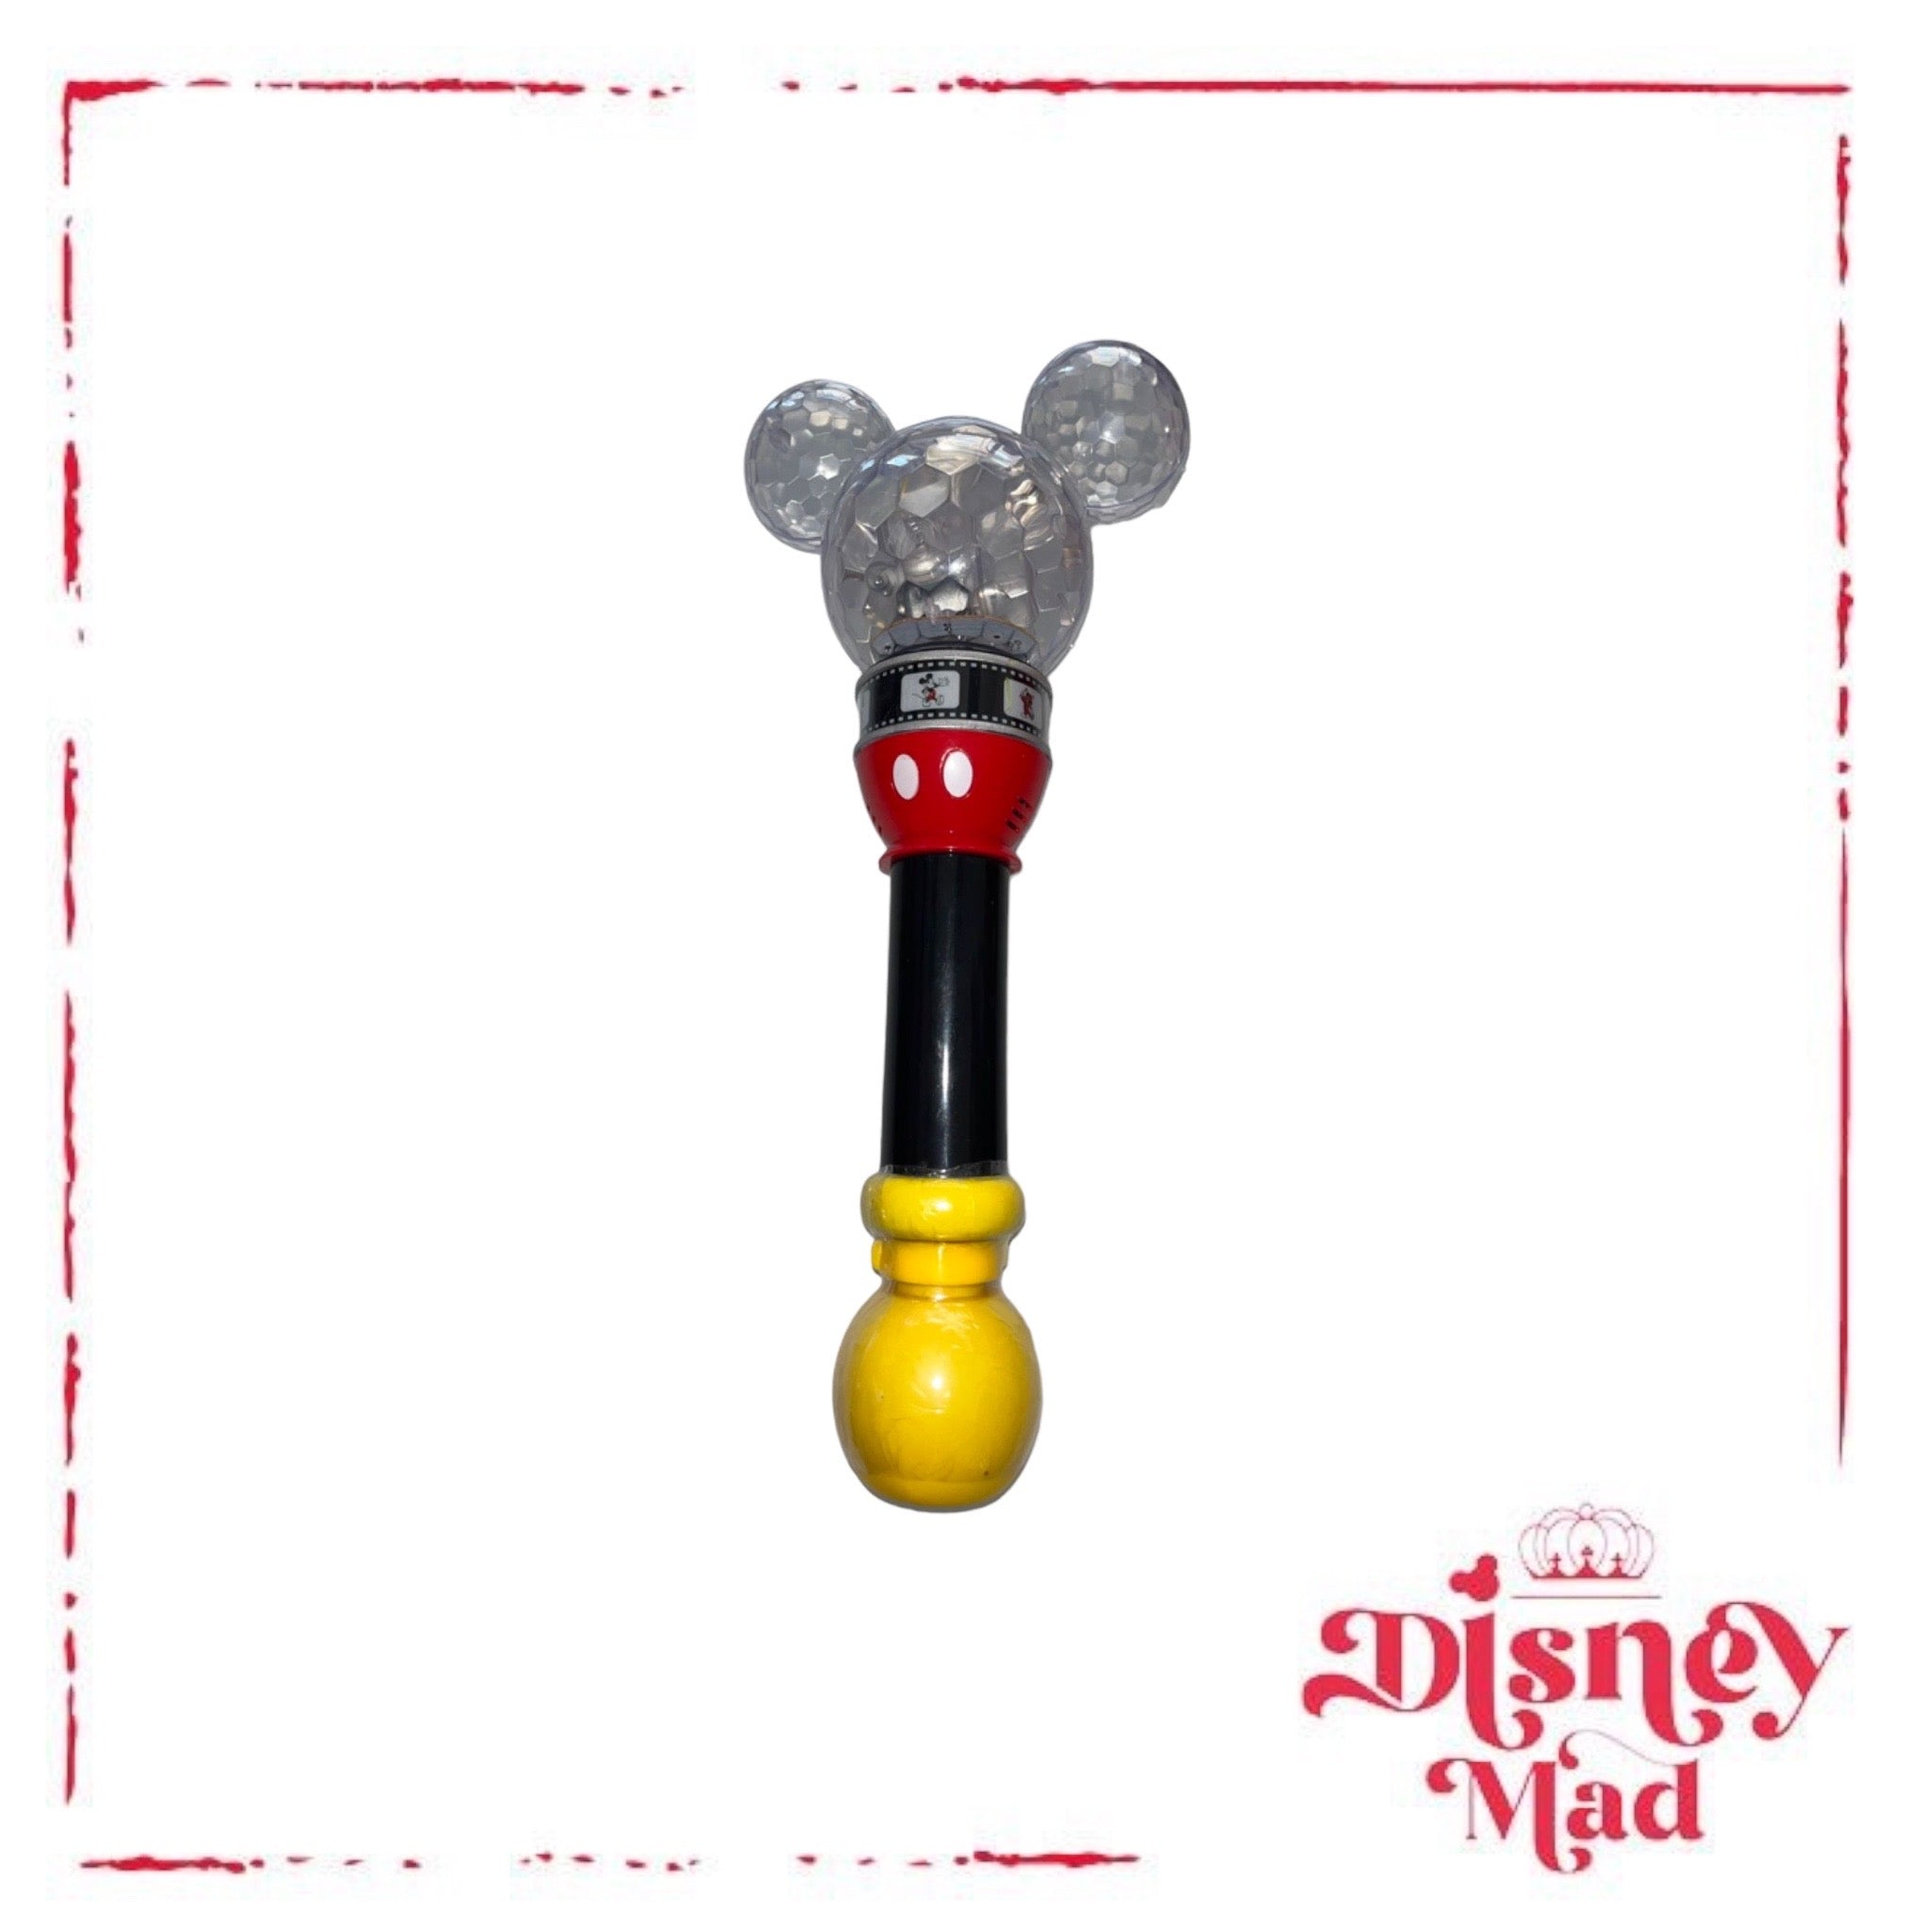 Disney Parks Exclusive Mickey Mouse Film Strip Light Up Bubble Wand Disney Mad Shop 3335